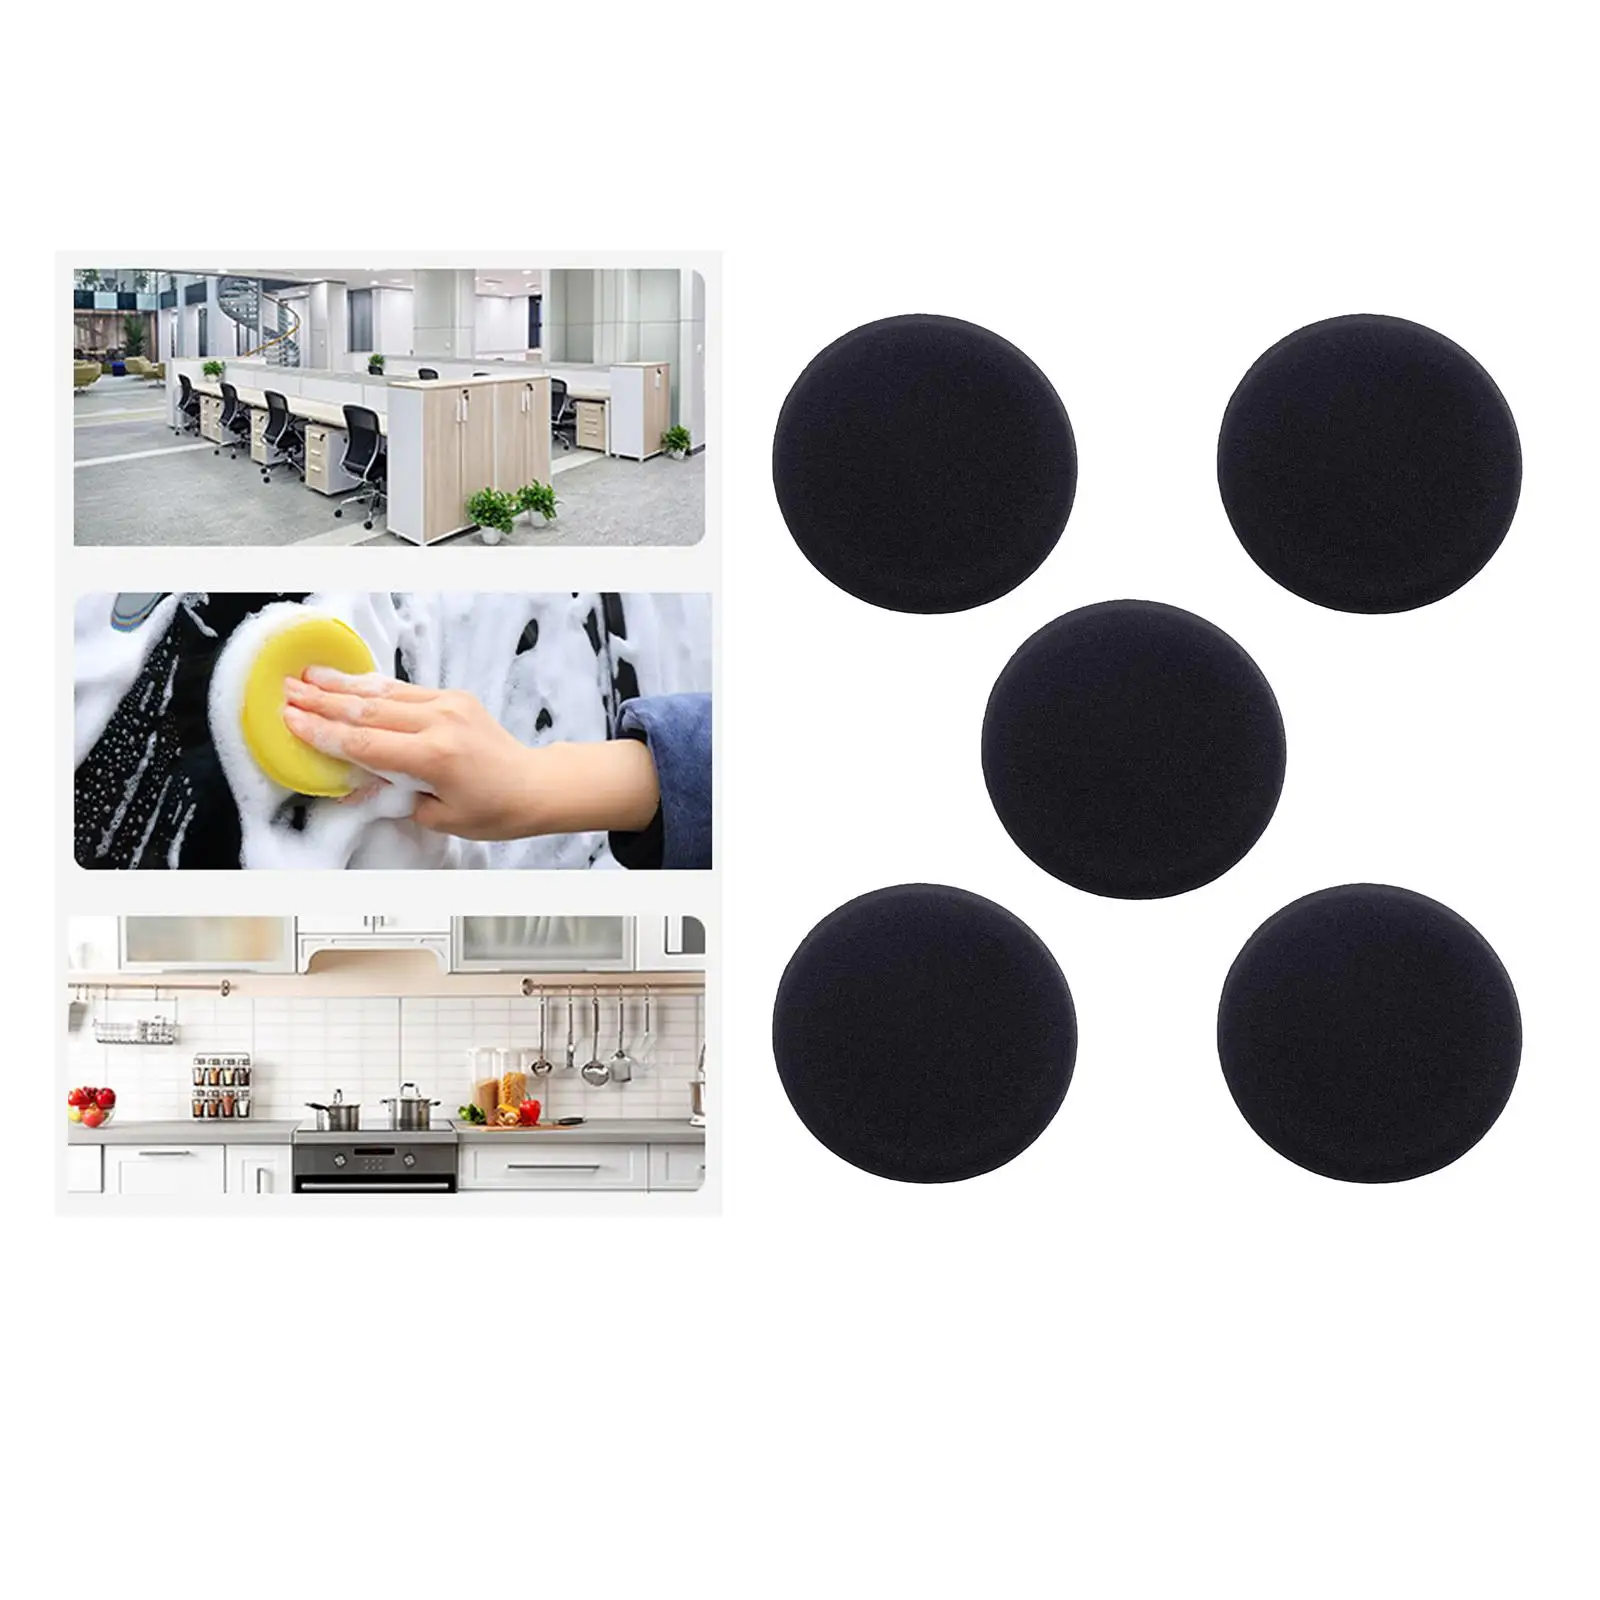 5Pcs Waxing Pads, Black Cleaning Tool, Round, for Vehicle, Soft Buffing Sponge